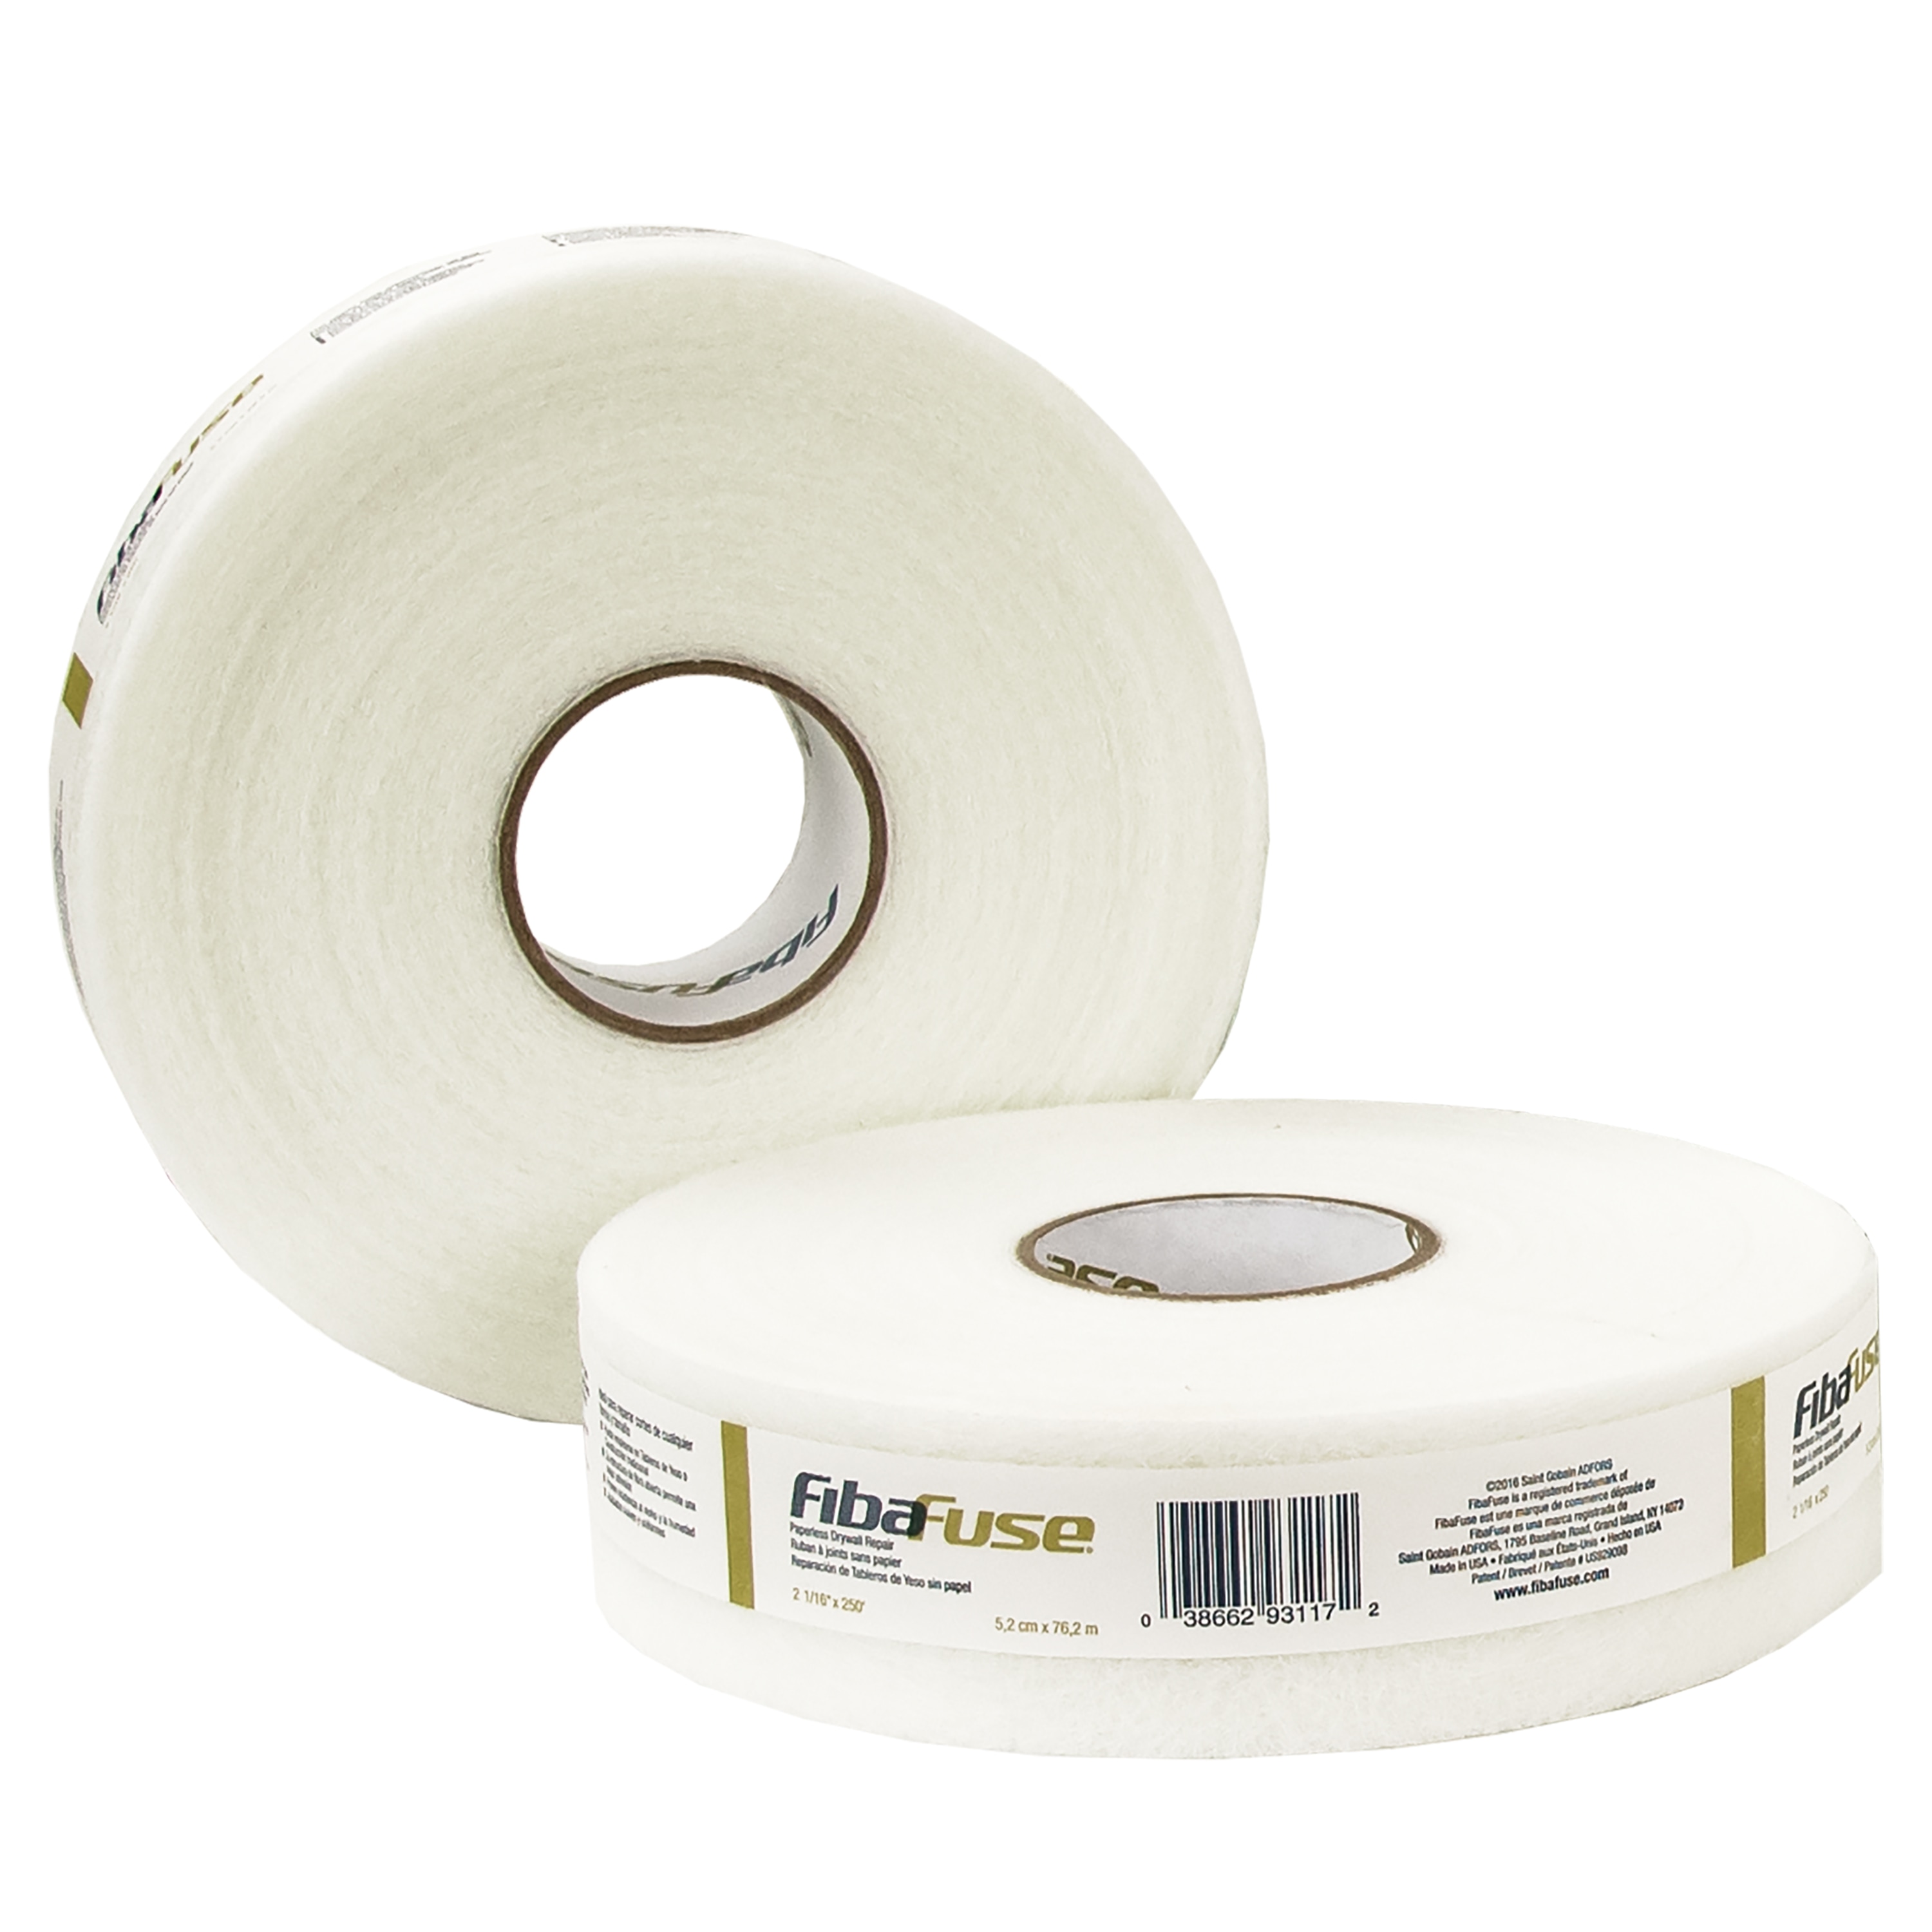 Roll-on glue tape Q-CONNECT, permanent, 6,5mmx8,5m - PBS Connect